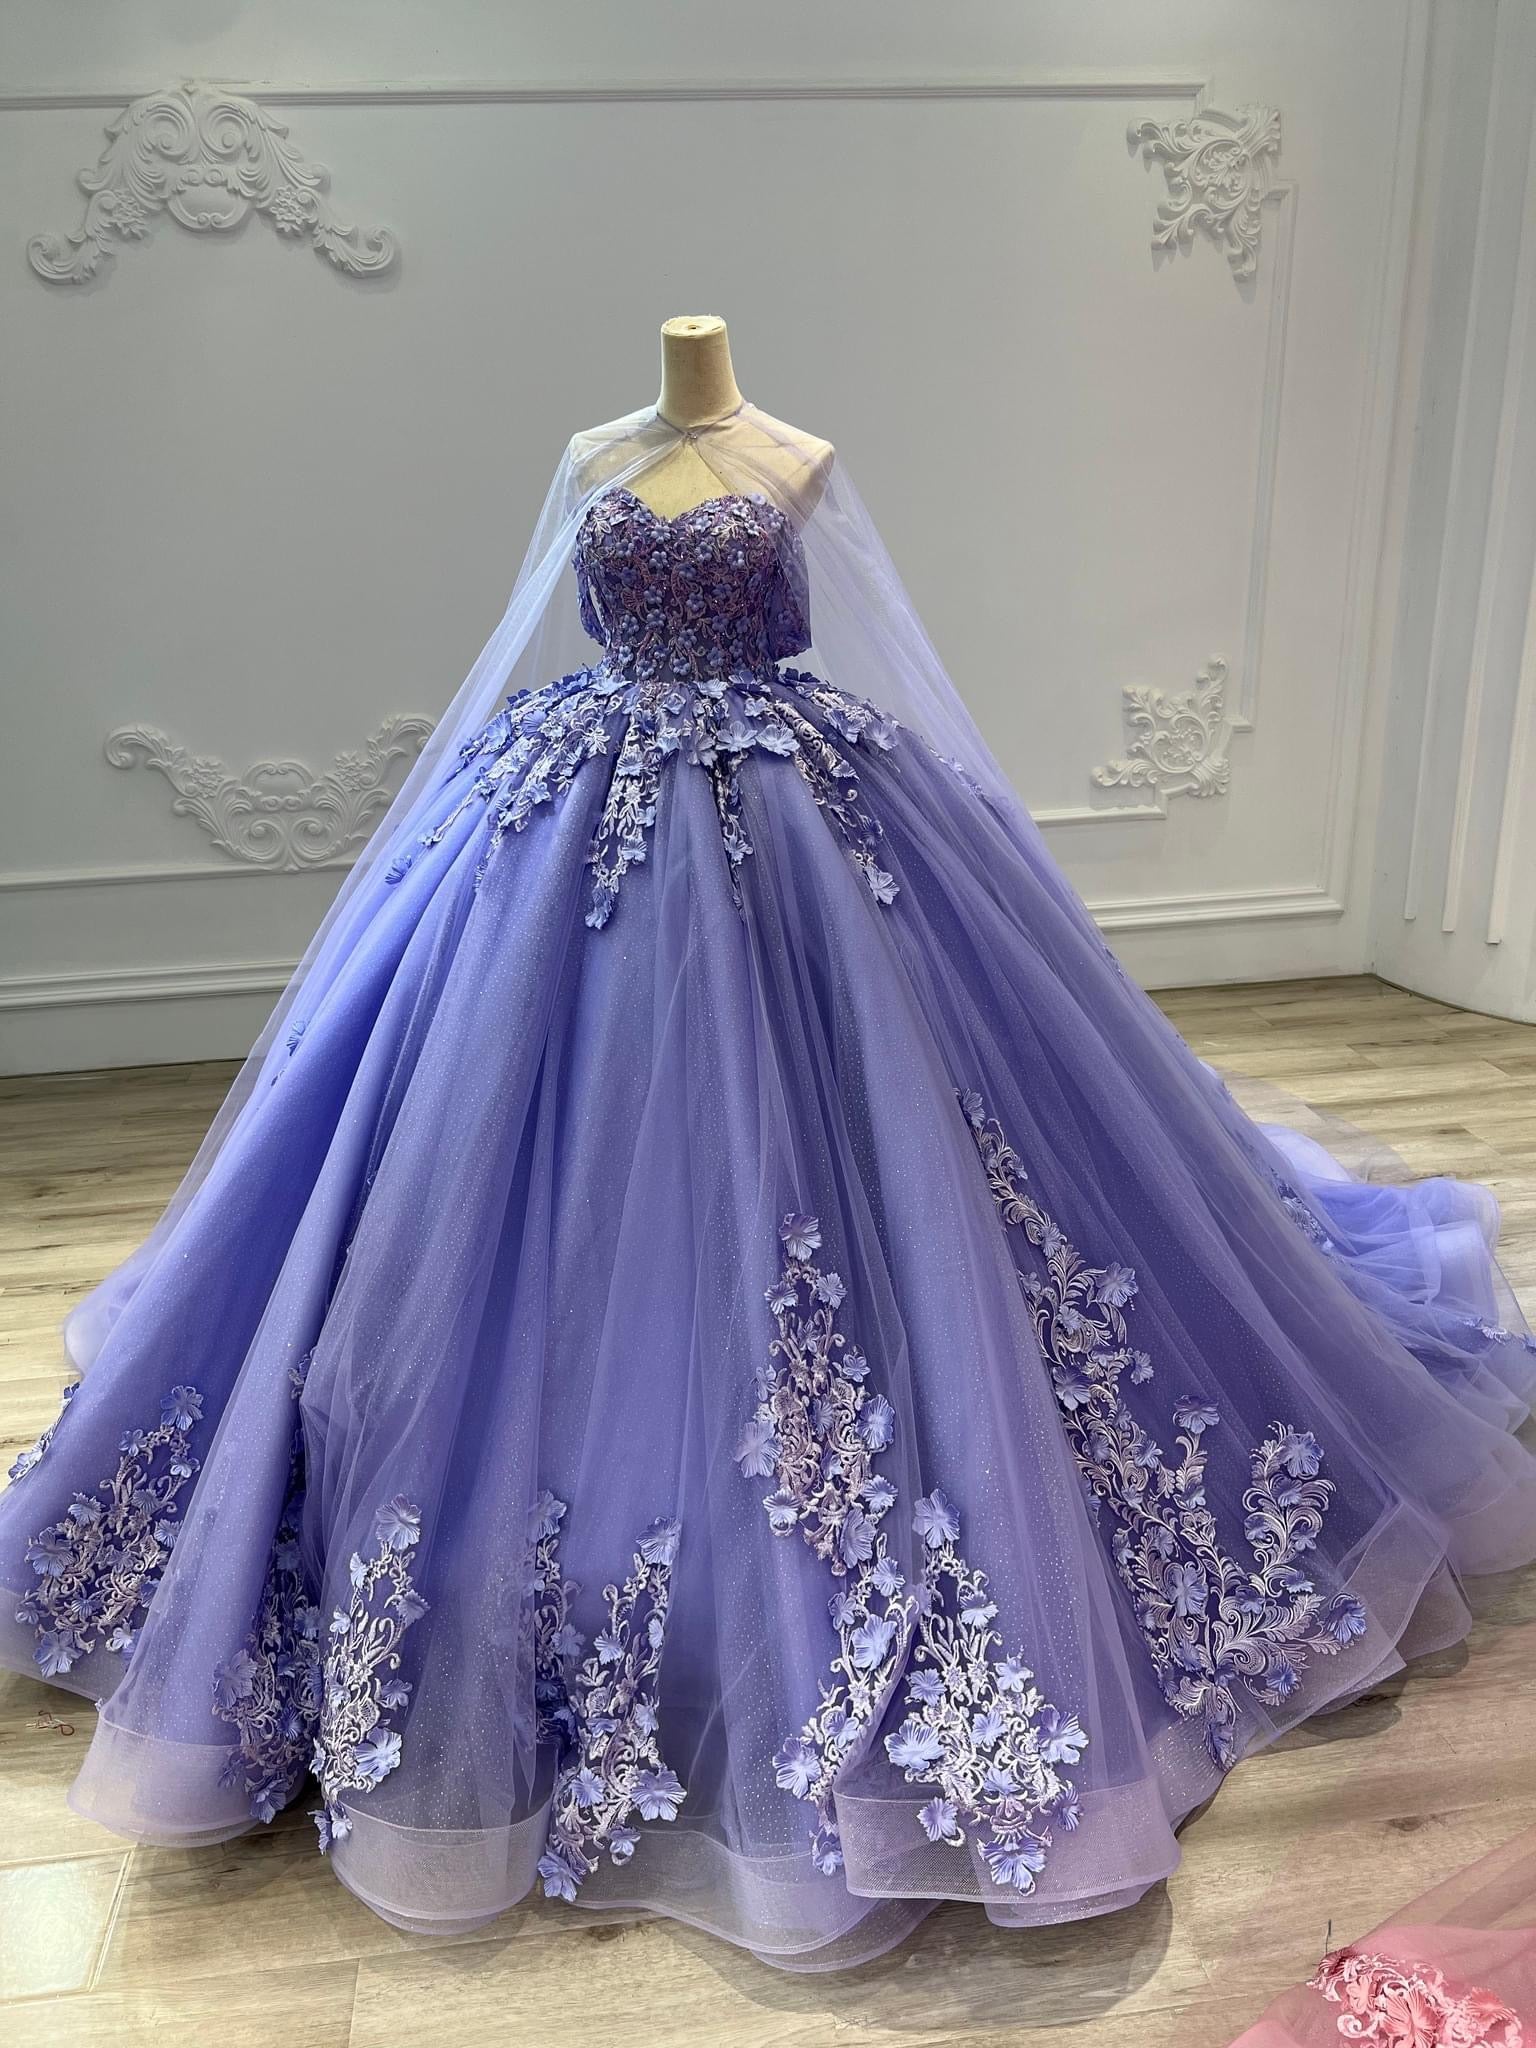 Buy Quinceanera Dresses Women's Sweetheart Tulle Ball Gown Evening Prom  Party Dresses Purple US22W at Amazon.in